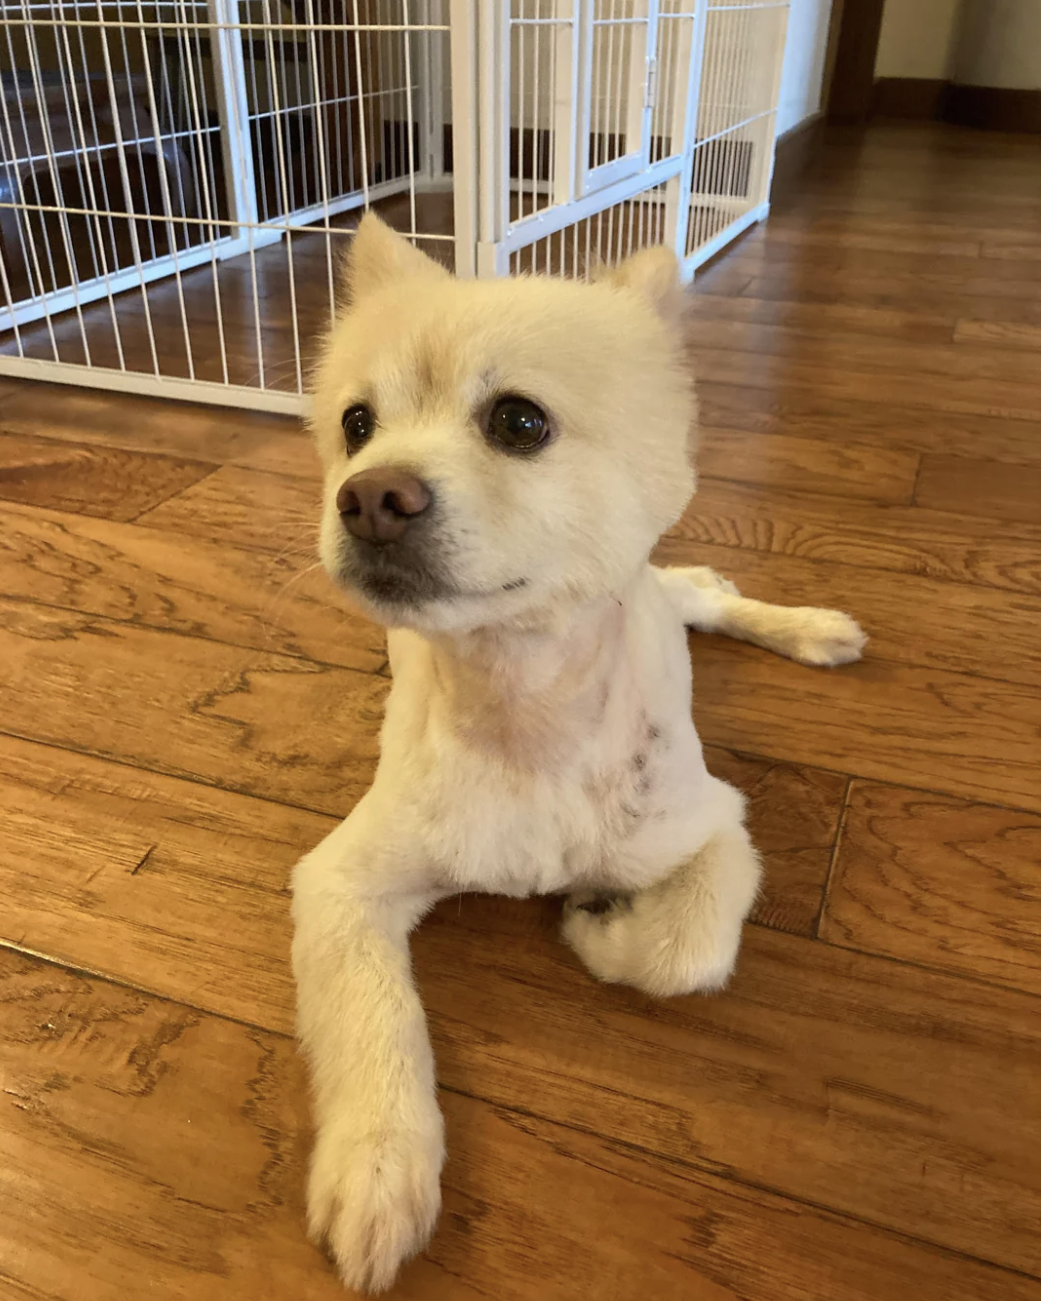 A small dog with a recent haircut sitting on a wooden floor, looking to the side